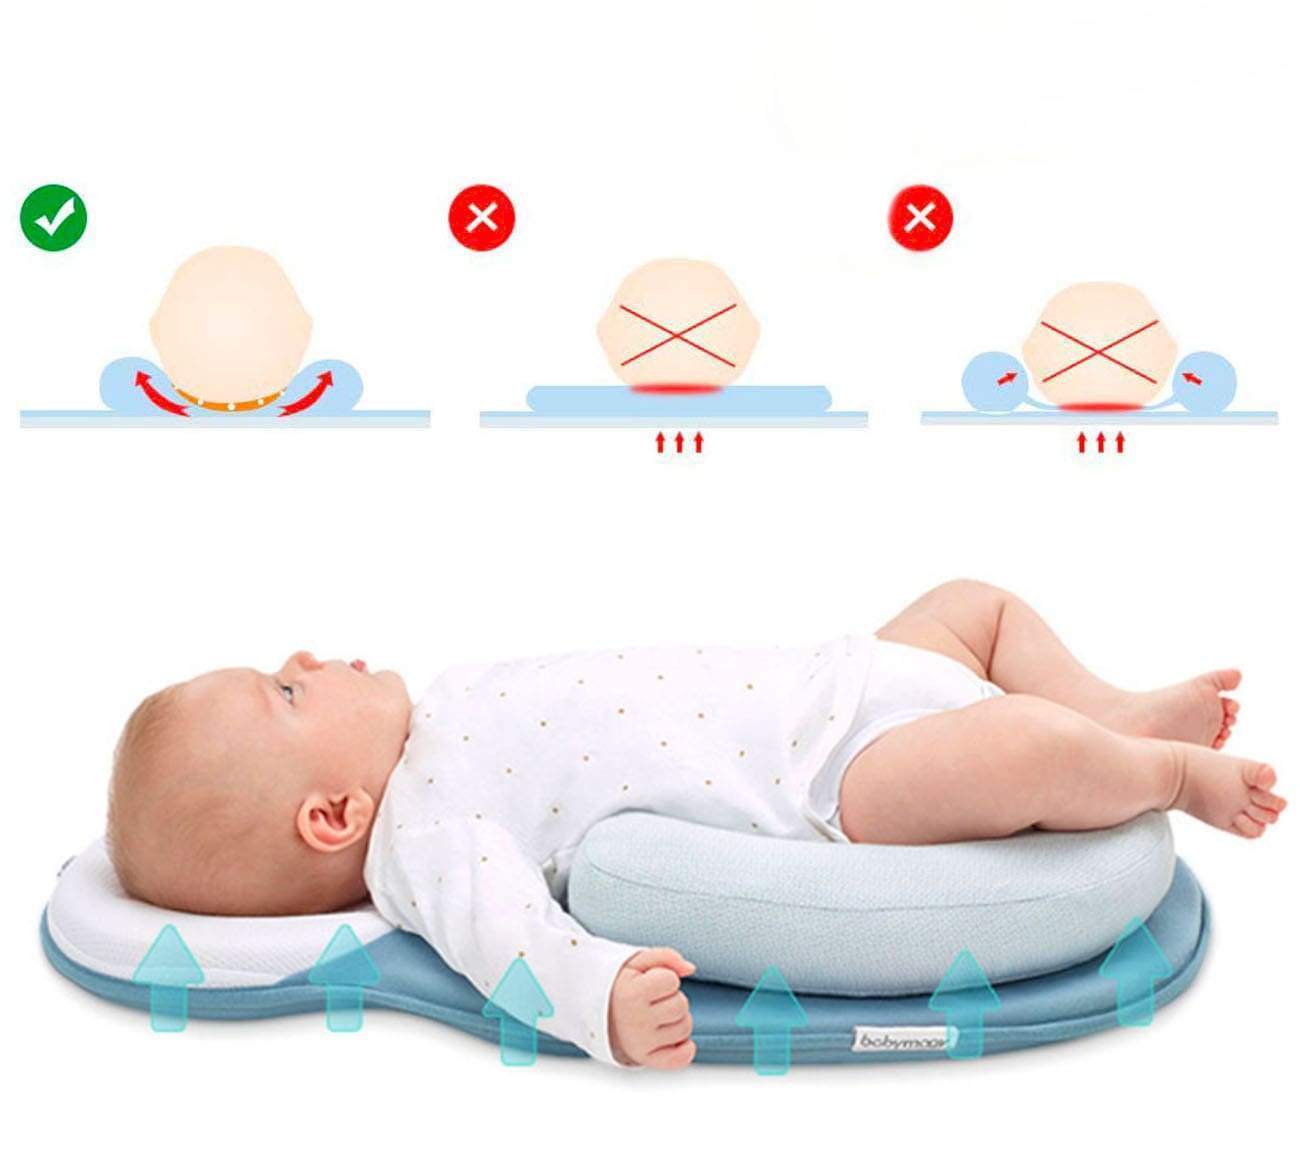 Majestic Compact Baby Cradle™